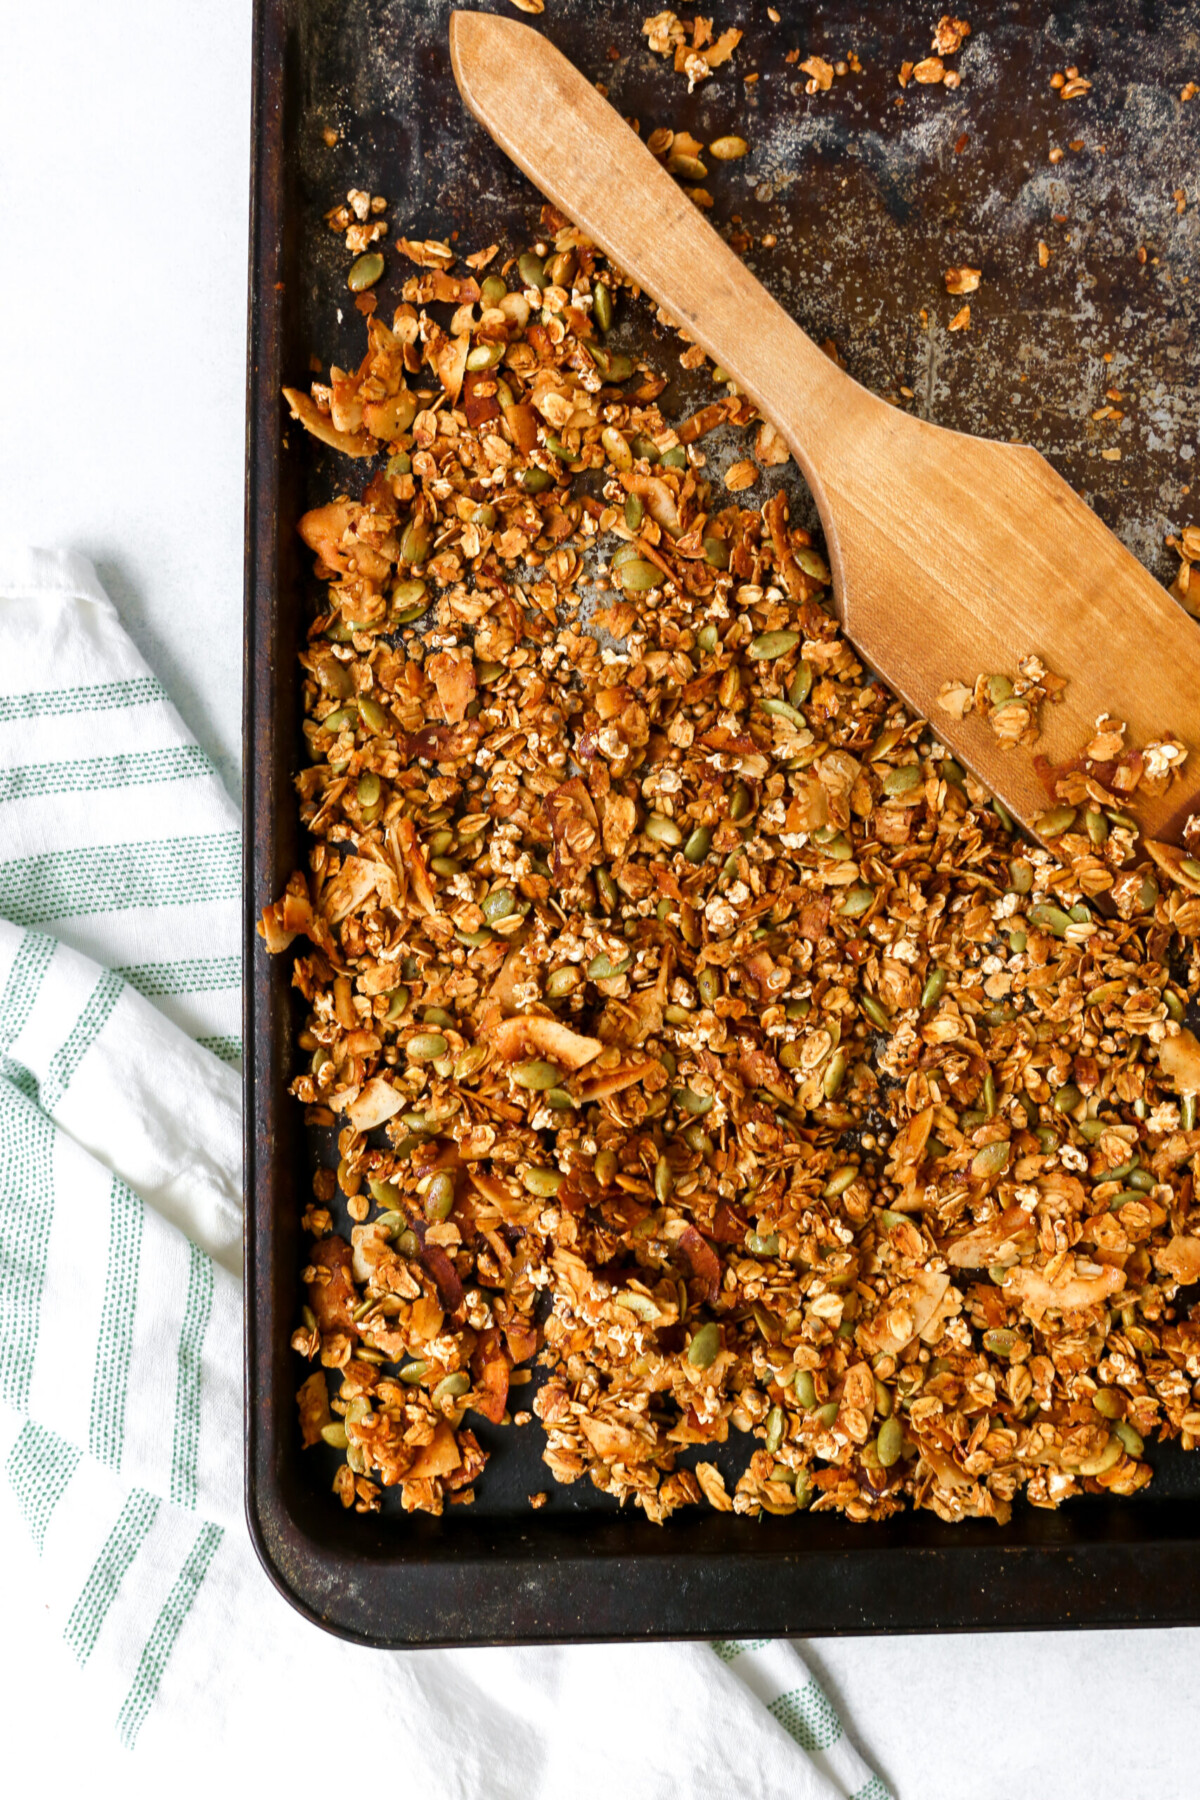 Homemade granola recipe on a black baking sheet with a white and green towel set to the side.